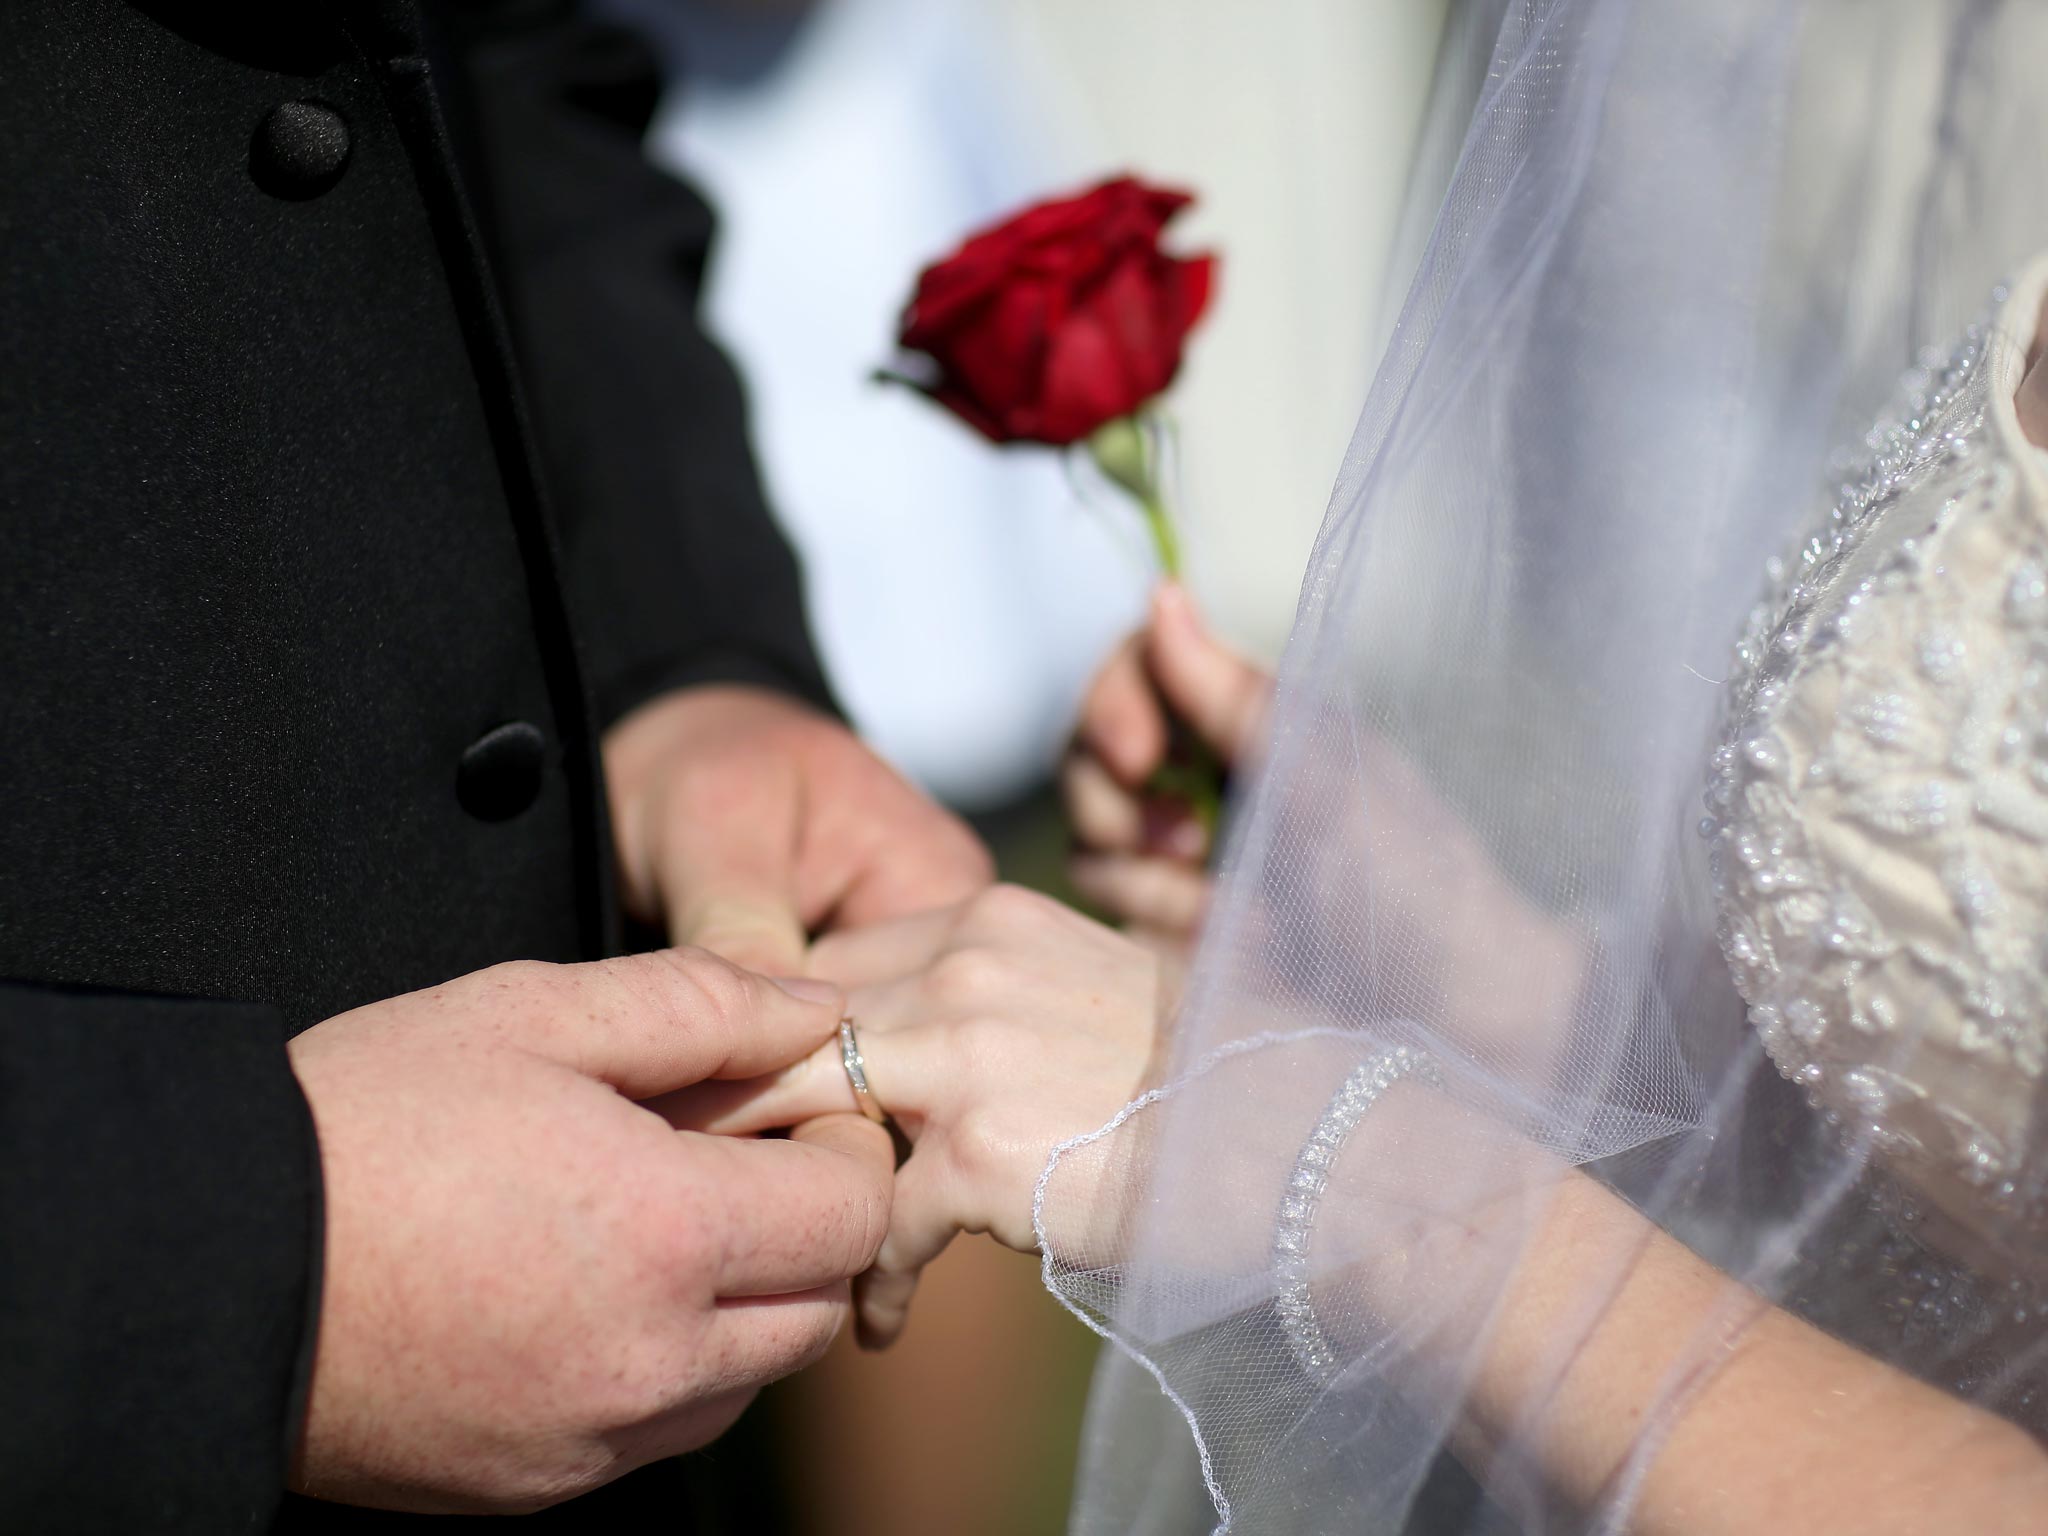 Official estimates of the level of sham marriages range between 4,000 and 10,000 every year